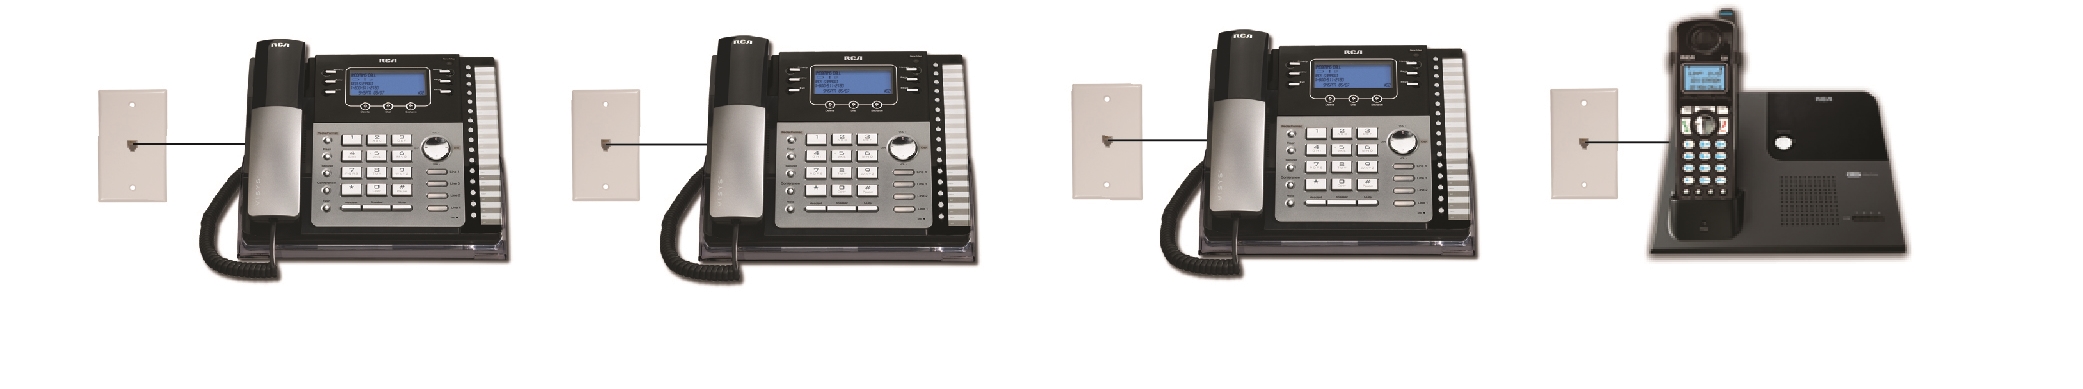 RCA 25424RE1 4-Line Expandable Phone System 3-Pack Office Desk Telephone with Built-in Caller ID and Intercom Bundle with 12 Blucoil AA Batteries 